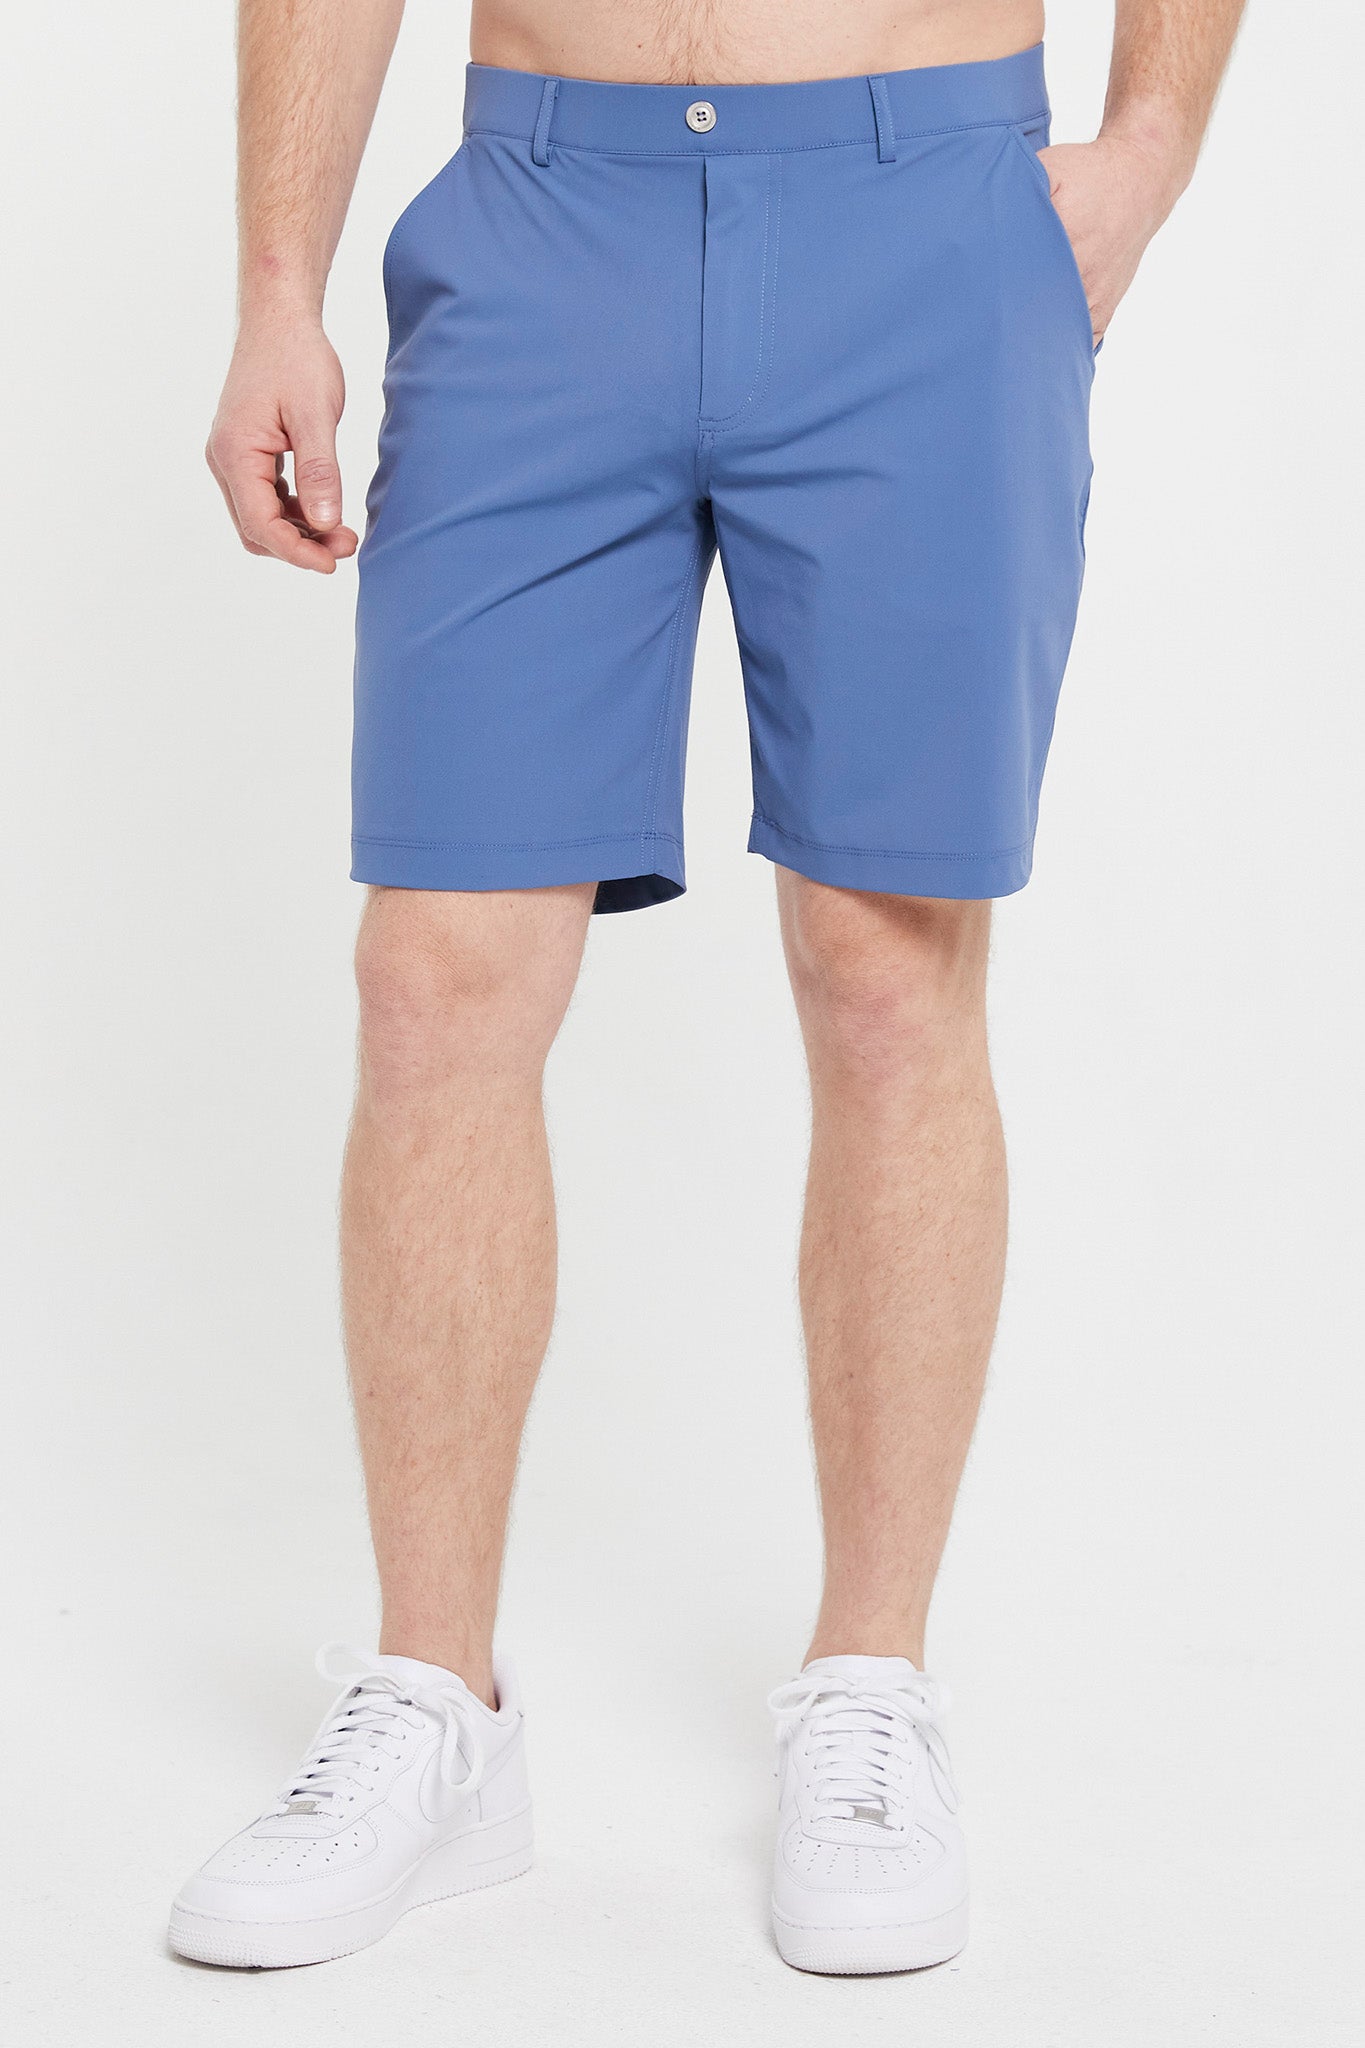 Image of the hanover pull-on short in blue horizon 1